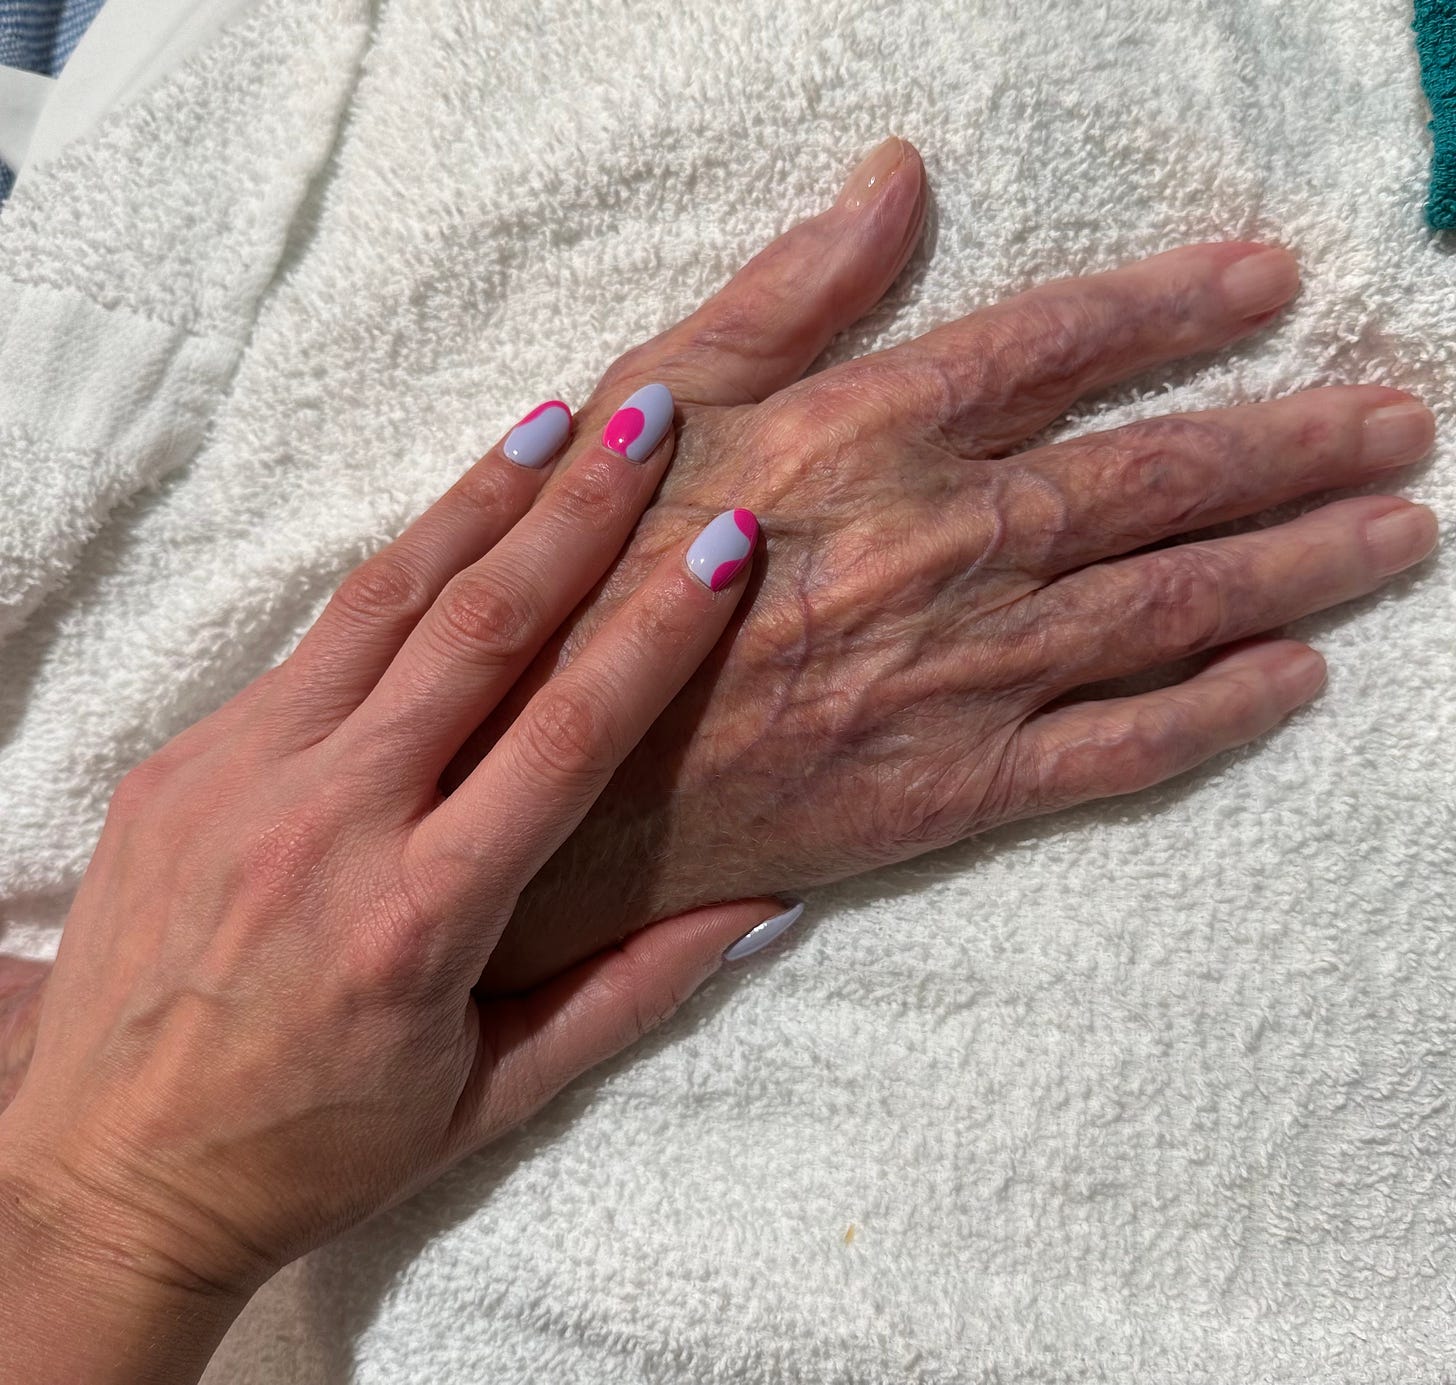 A white woman's left hand lies on top of an elderly white man's right hand.